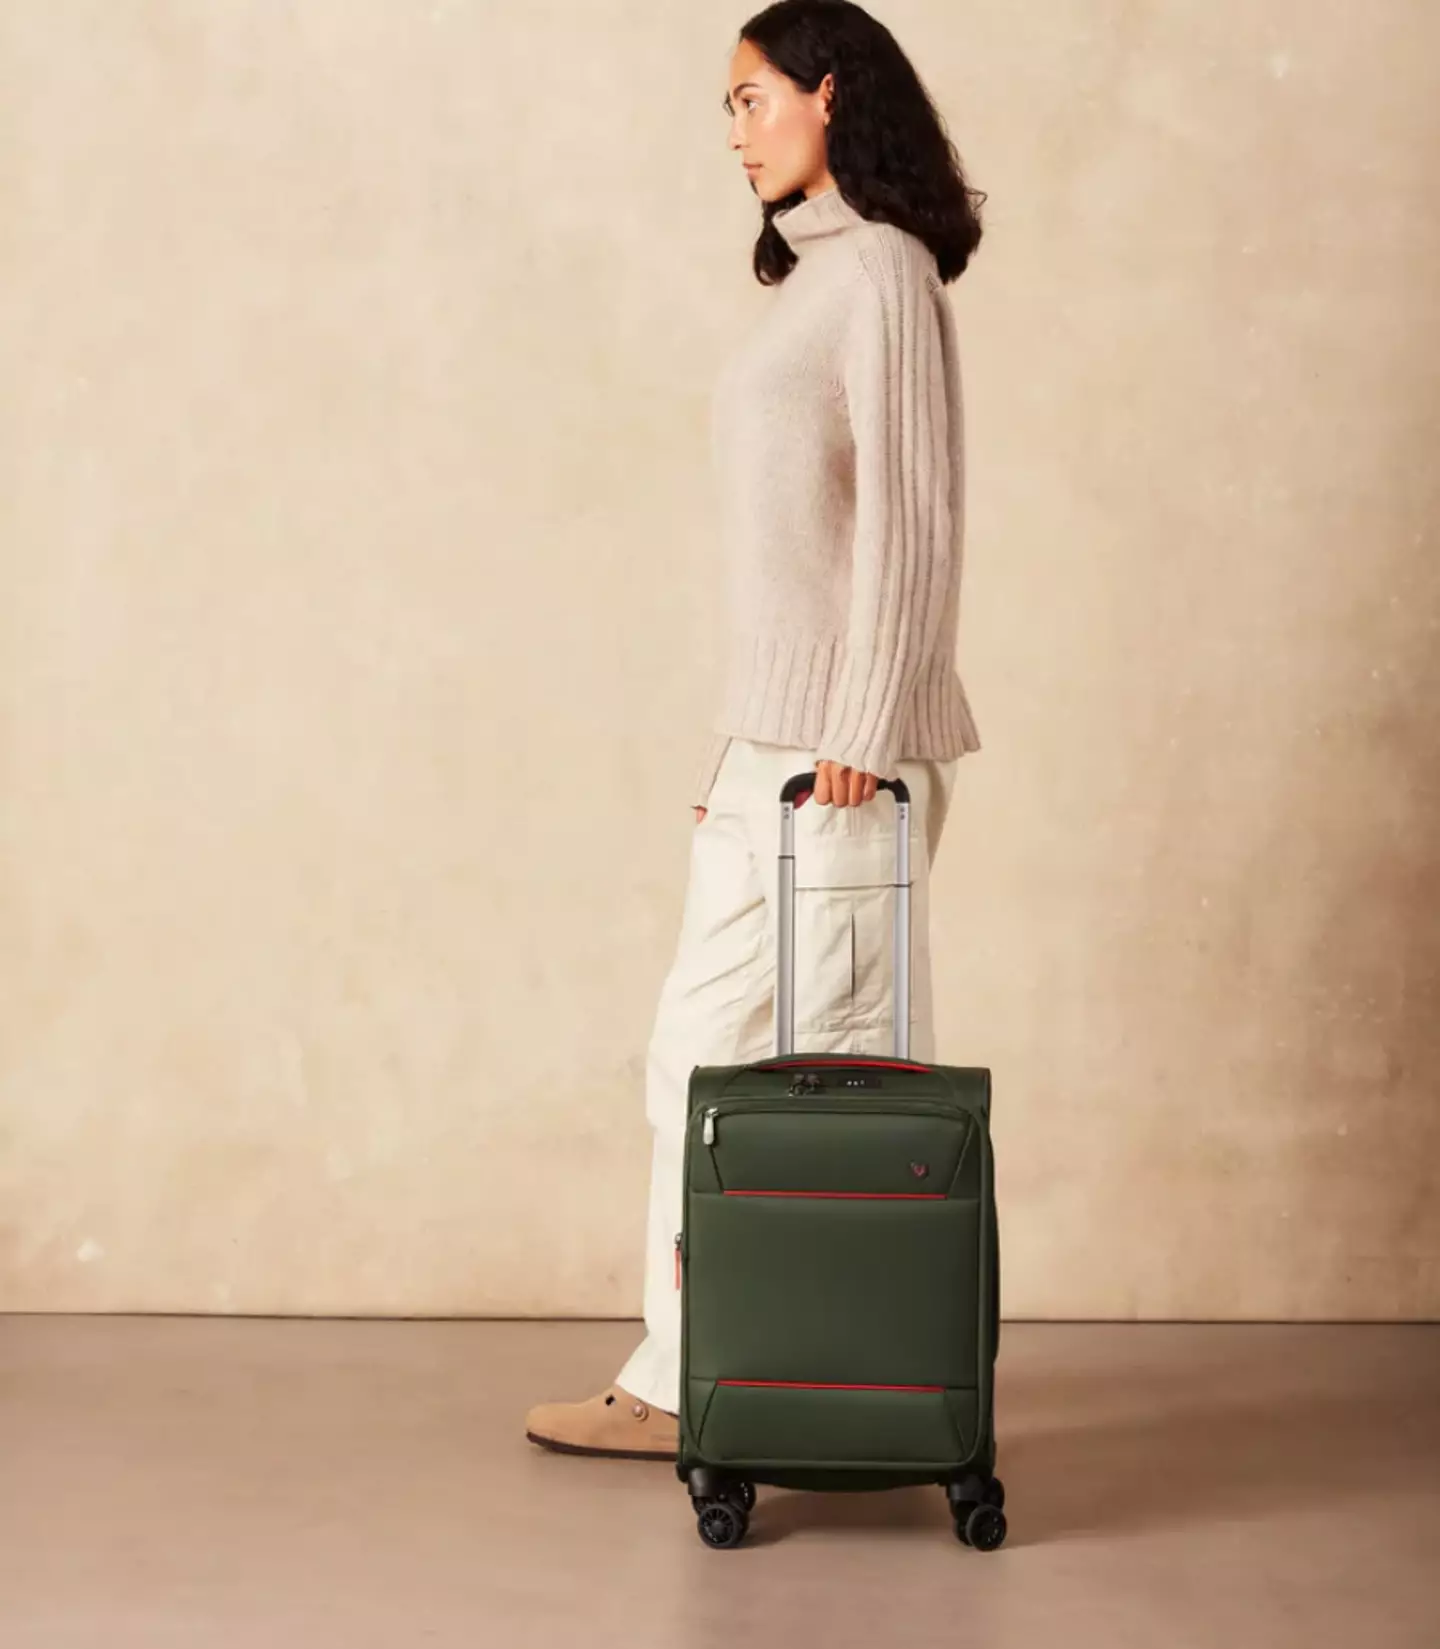 With a saving of over £60, this suitcase from Antler promises to pack lots whilst still meeting Ryanair cabin baggage rules.